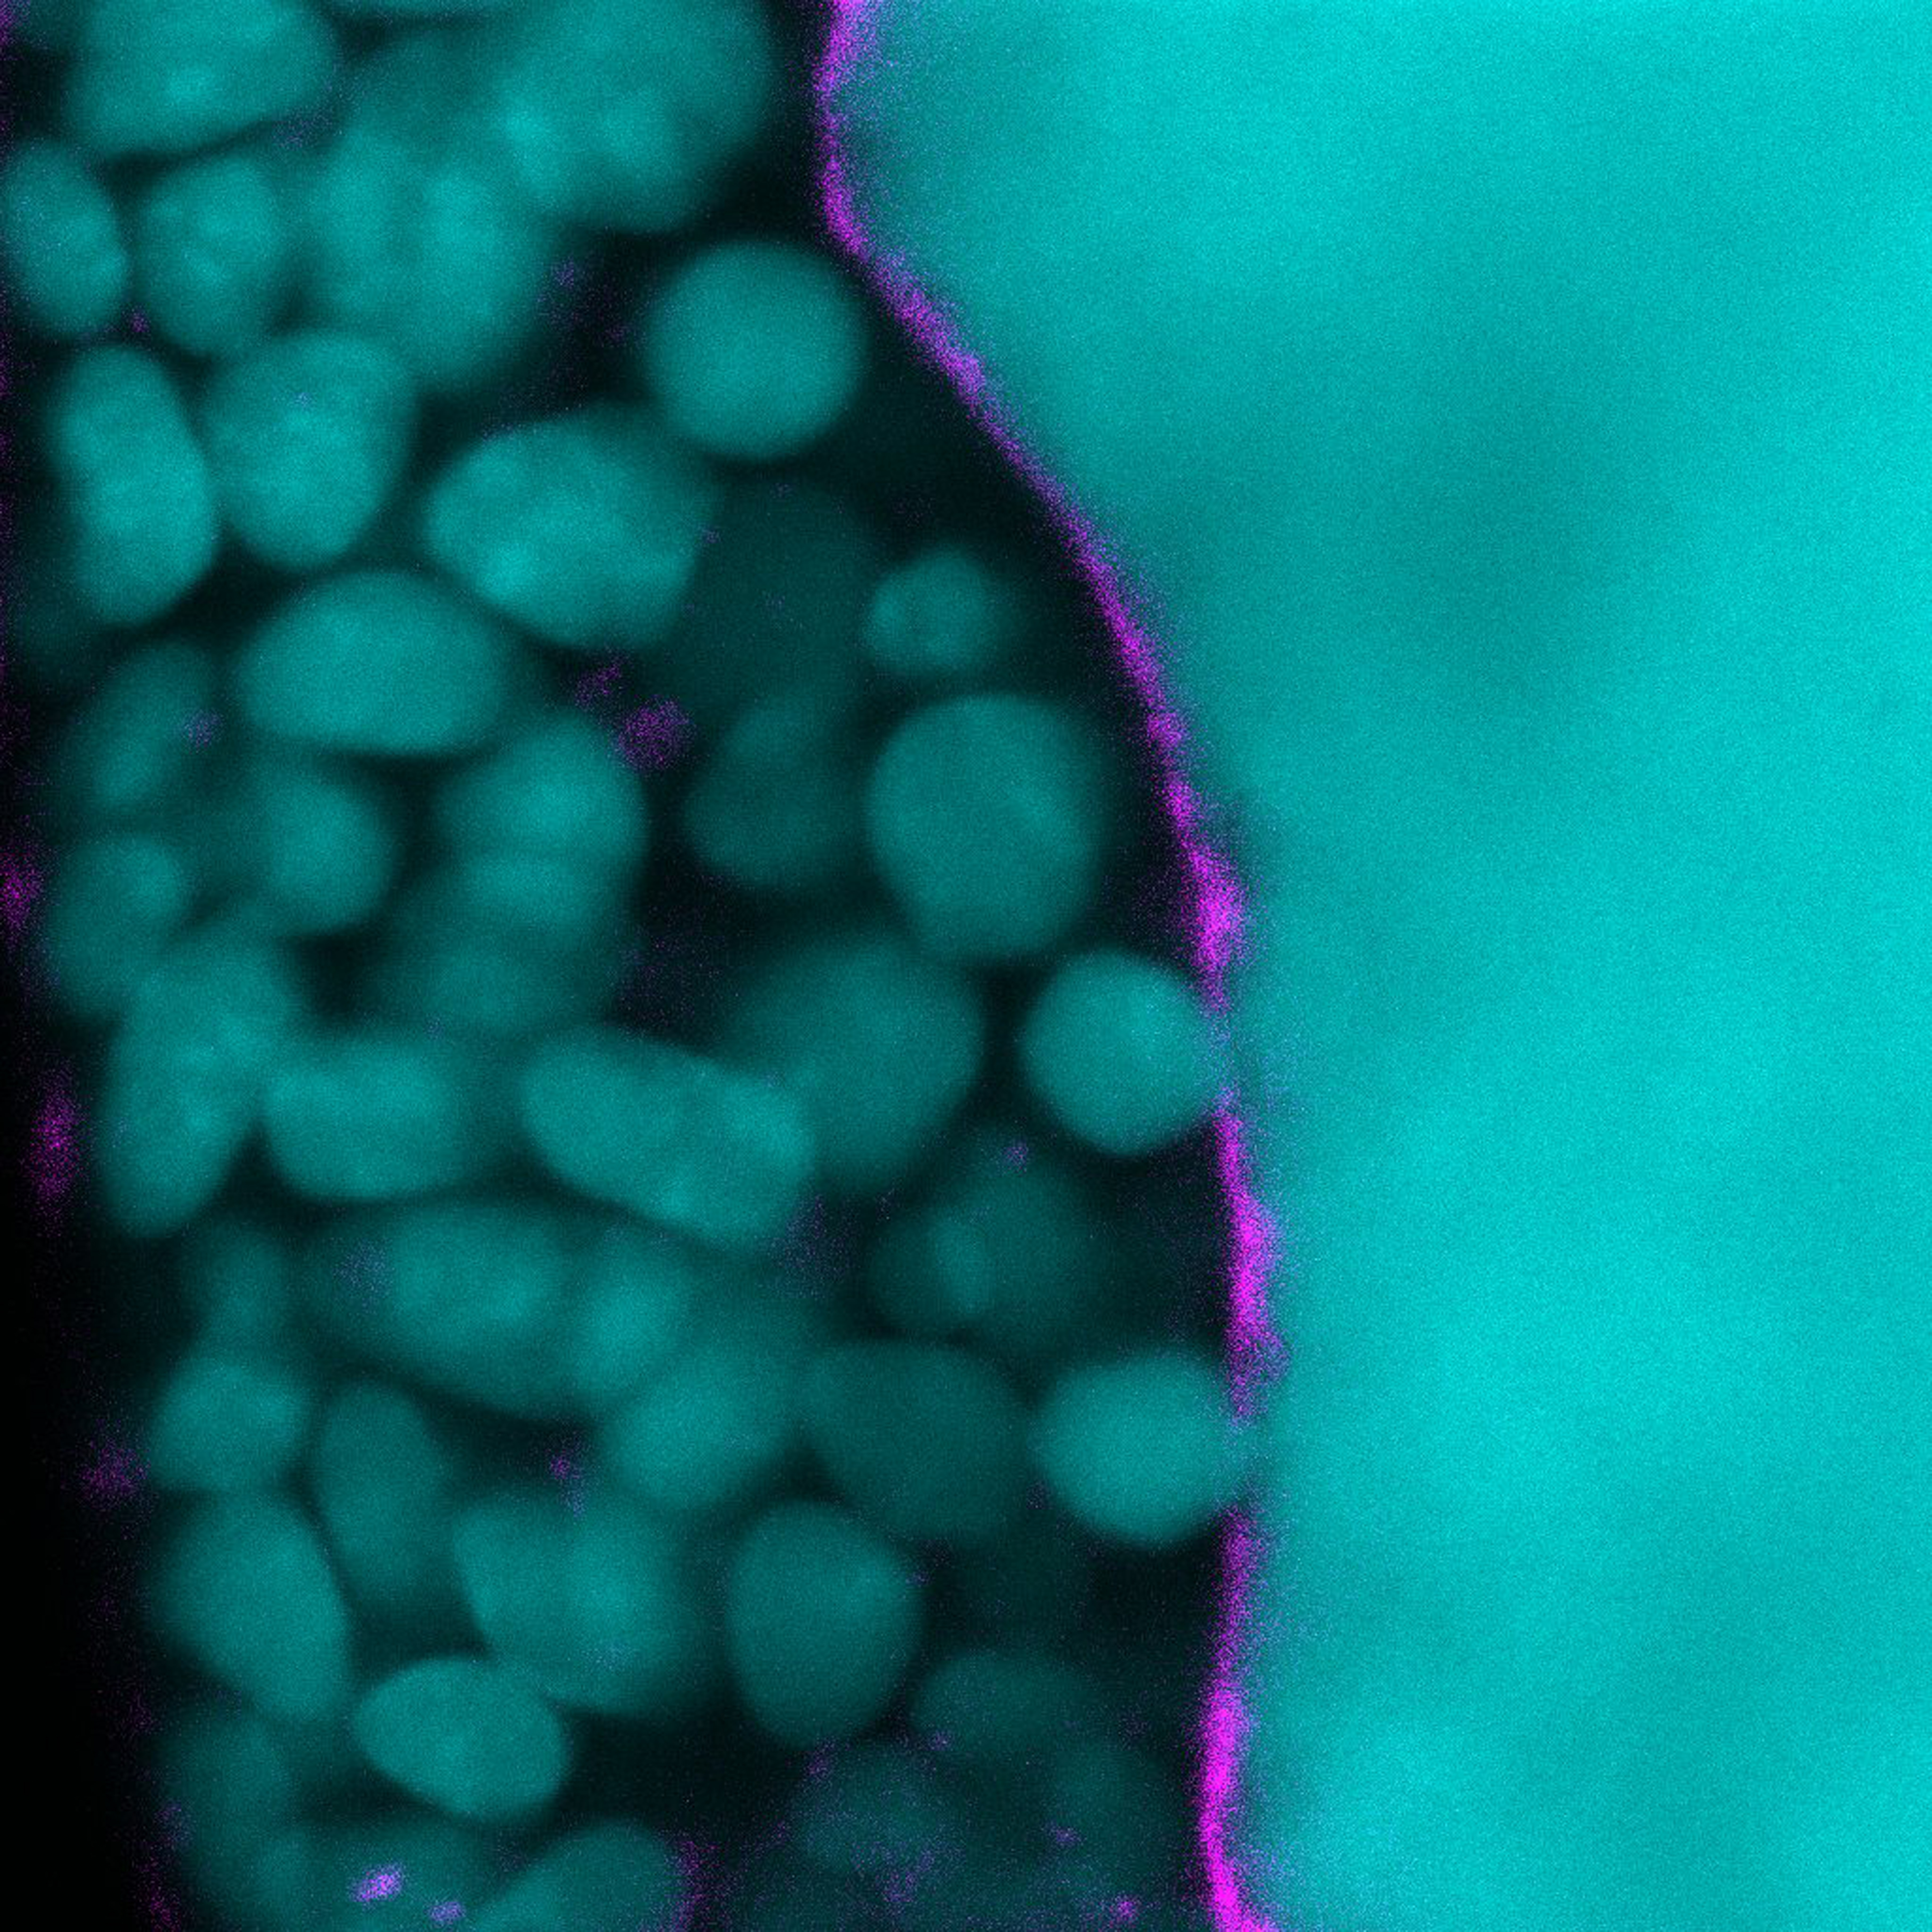 Loss of the protective peritrophic membrane results in epithelial expression of an IL-6 like cytokine, causing upregulation of JAK/STAT signaling (green) in cells that comprise the progenitor cell niche of the digestive tract in Drosophila.  JAK/STAT upregulation causes niche disruption and progenitor cell proliferation.  Nuclei are shown in blue.